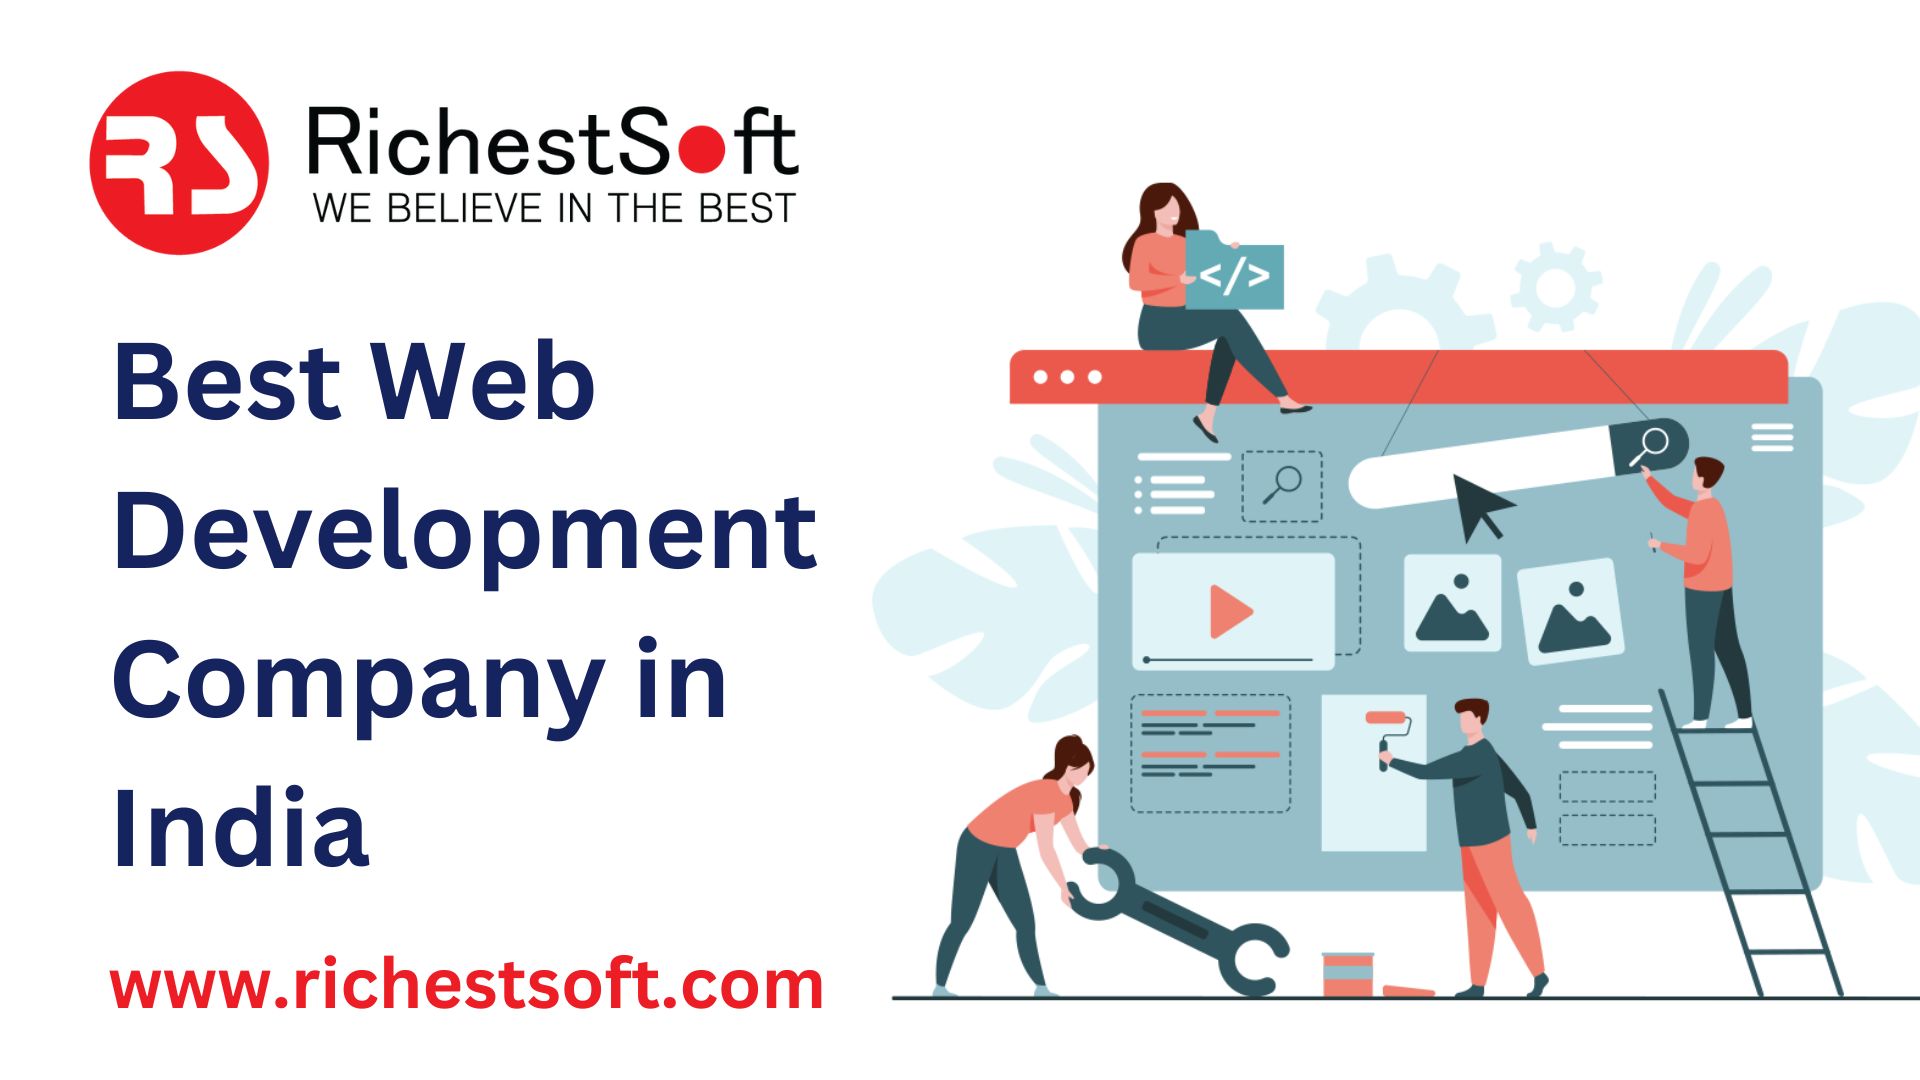 RichestSeft

WE BELIEVE IN THE BEST

Best Web
Development
Company in
India

www.richestsoft.com